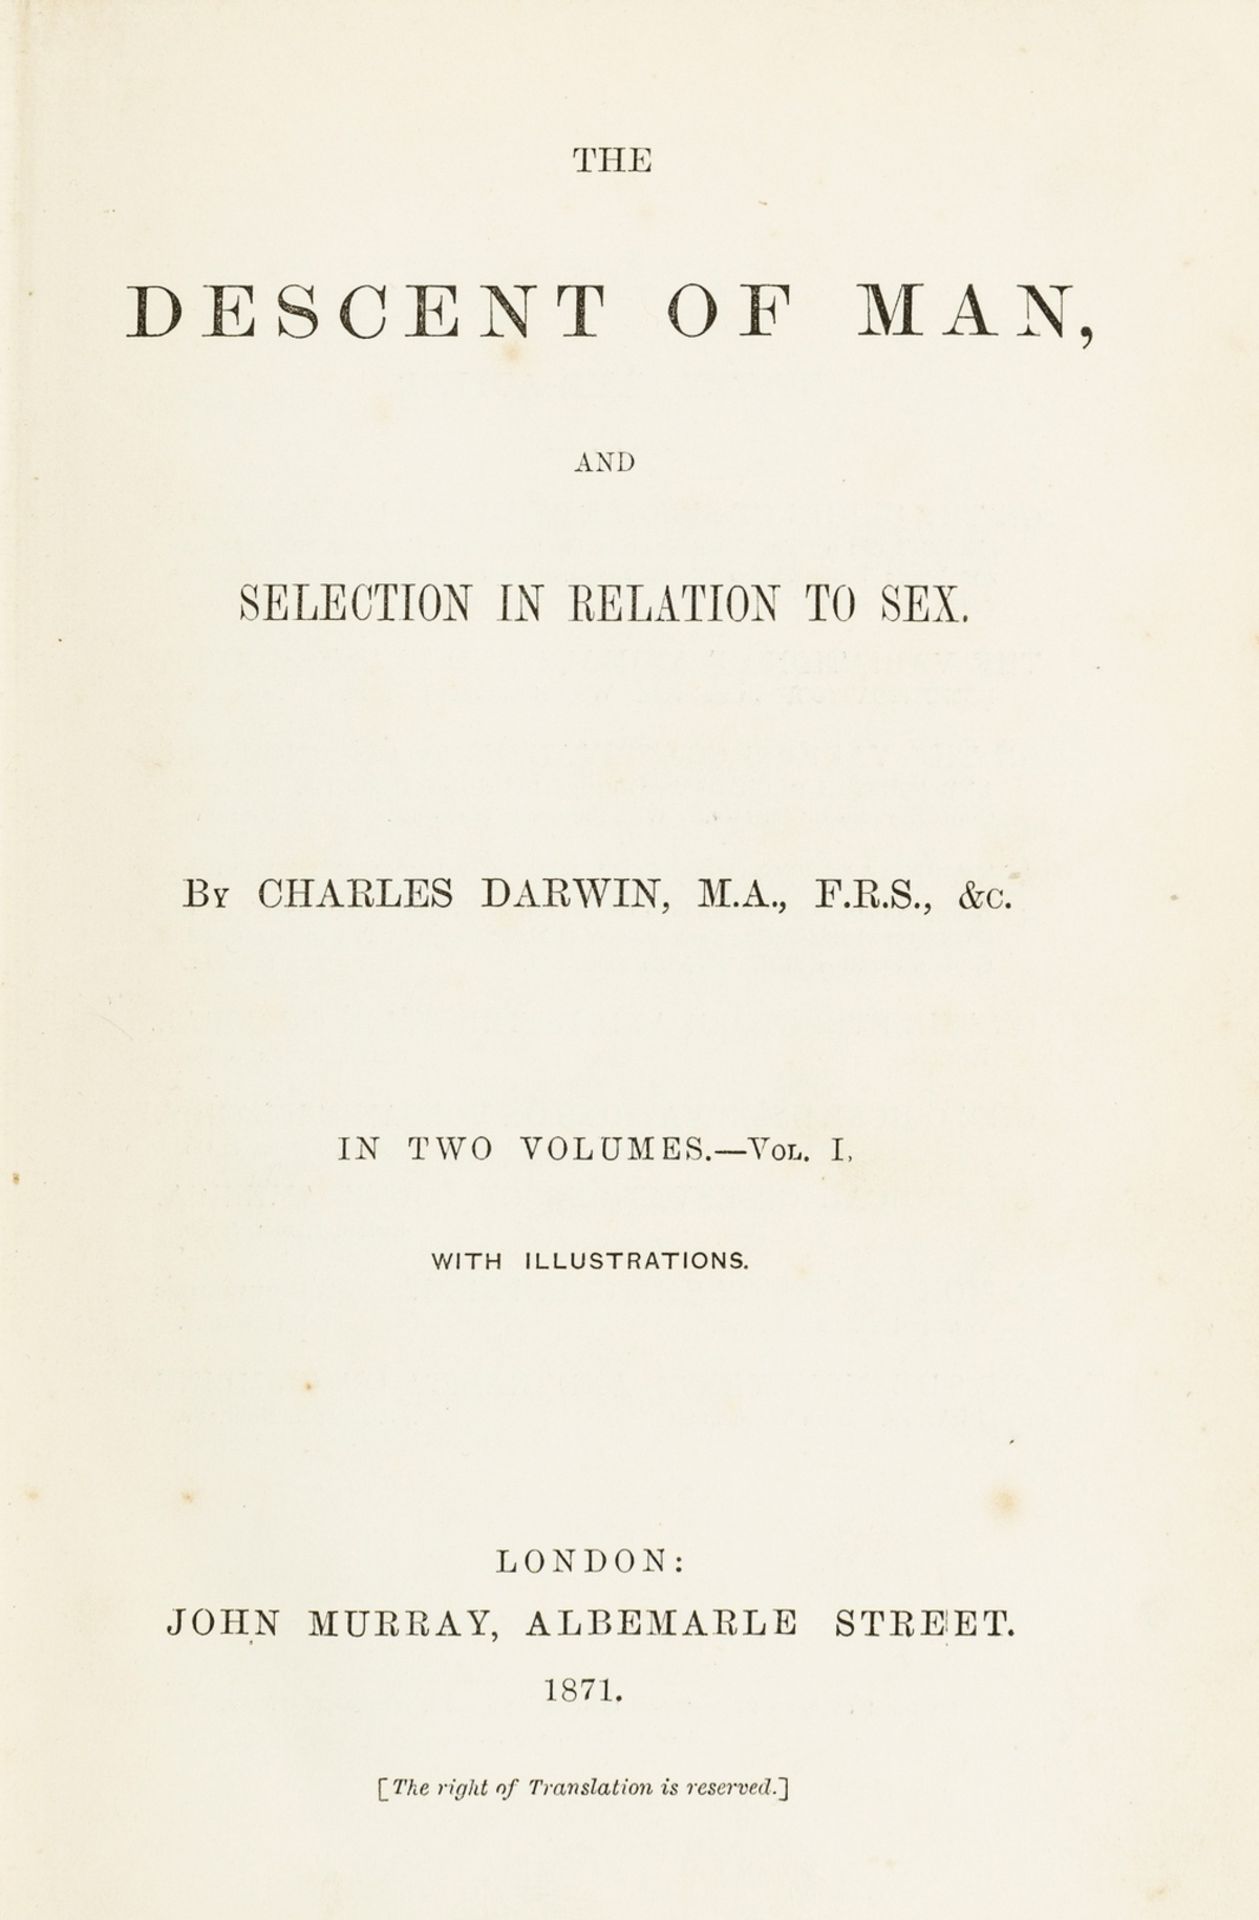 Darwin (Charles) The Descent of Man, 2 vol., first edition, second issue, 1871.